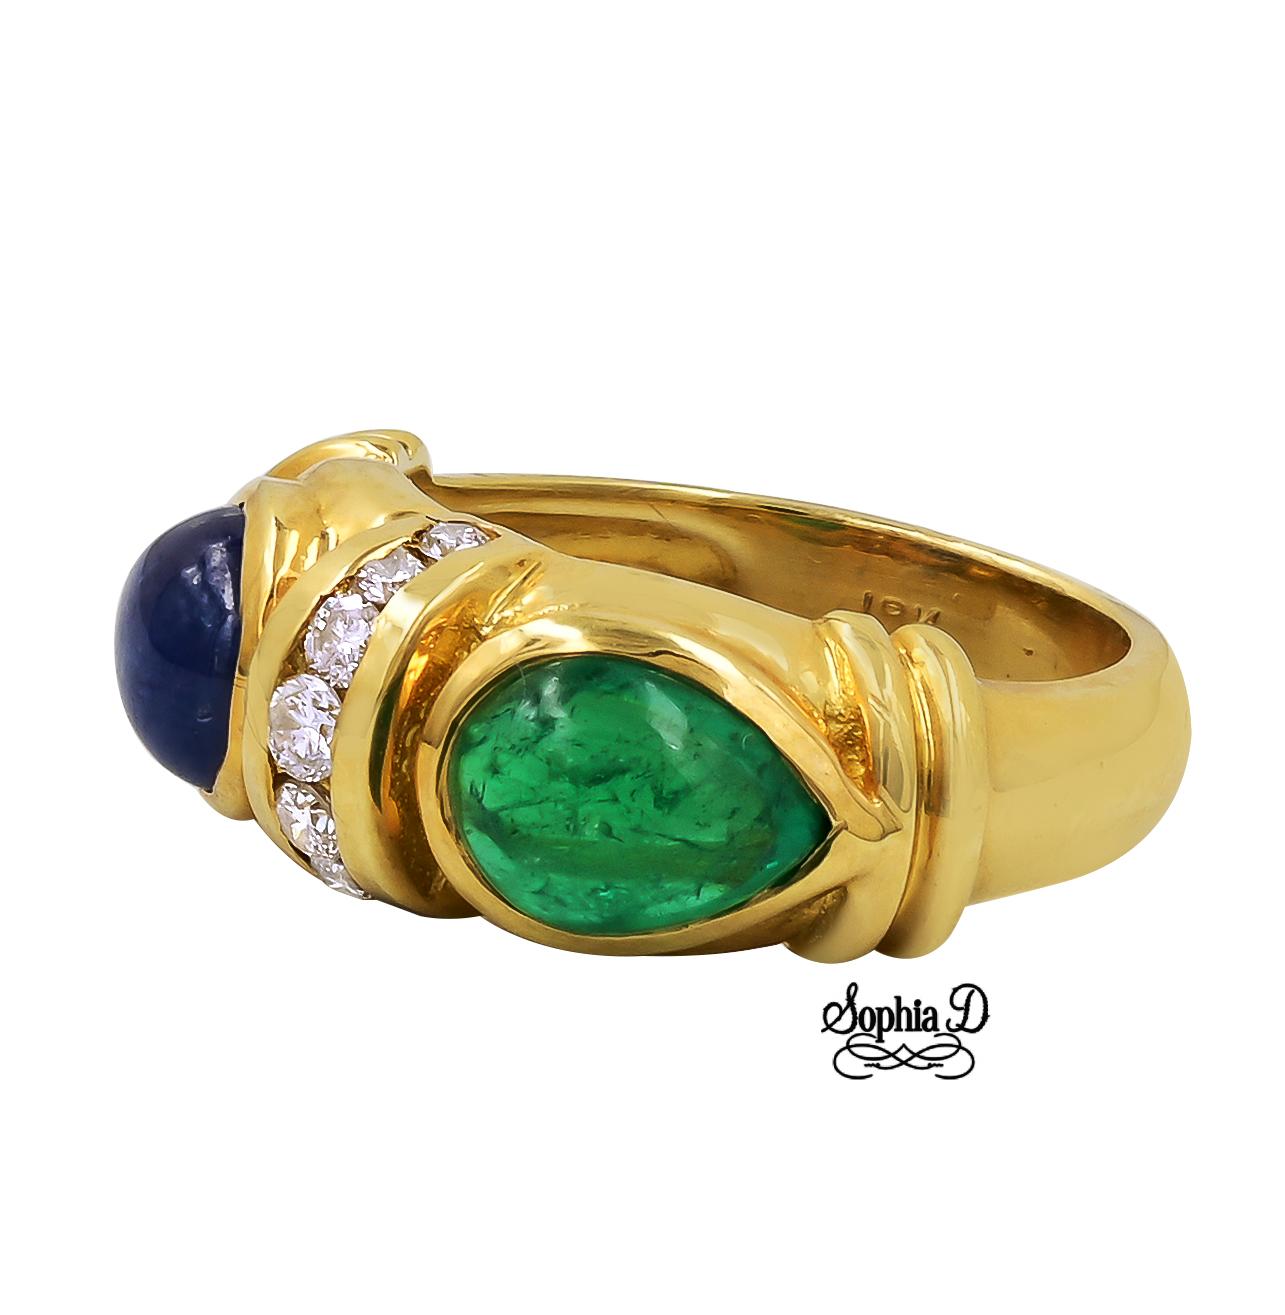 18K yellow gold ring with blue sapphire, emerald and diamond.

Sophia D by Joseph Dardashti LTD has been known worldwide for 35 years and are inspired by classic Art Deco design that merges with modern manufacturing techniques.  